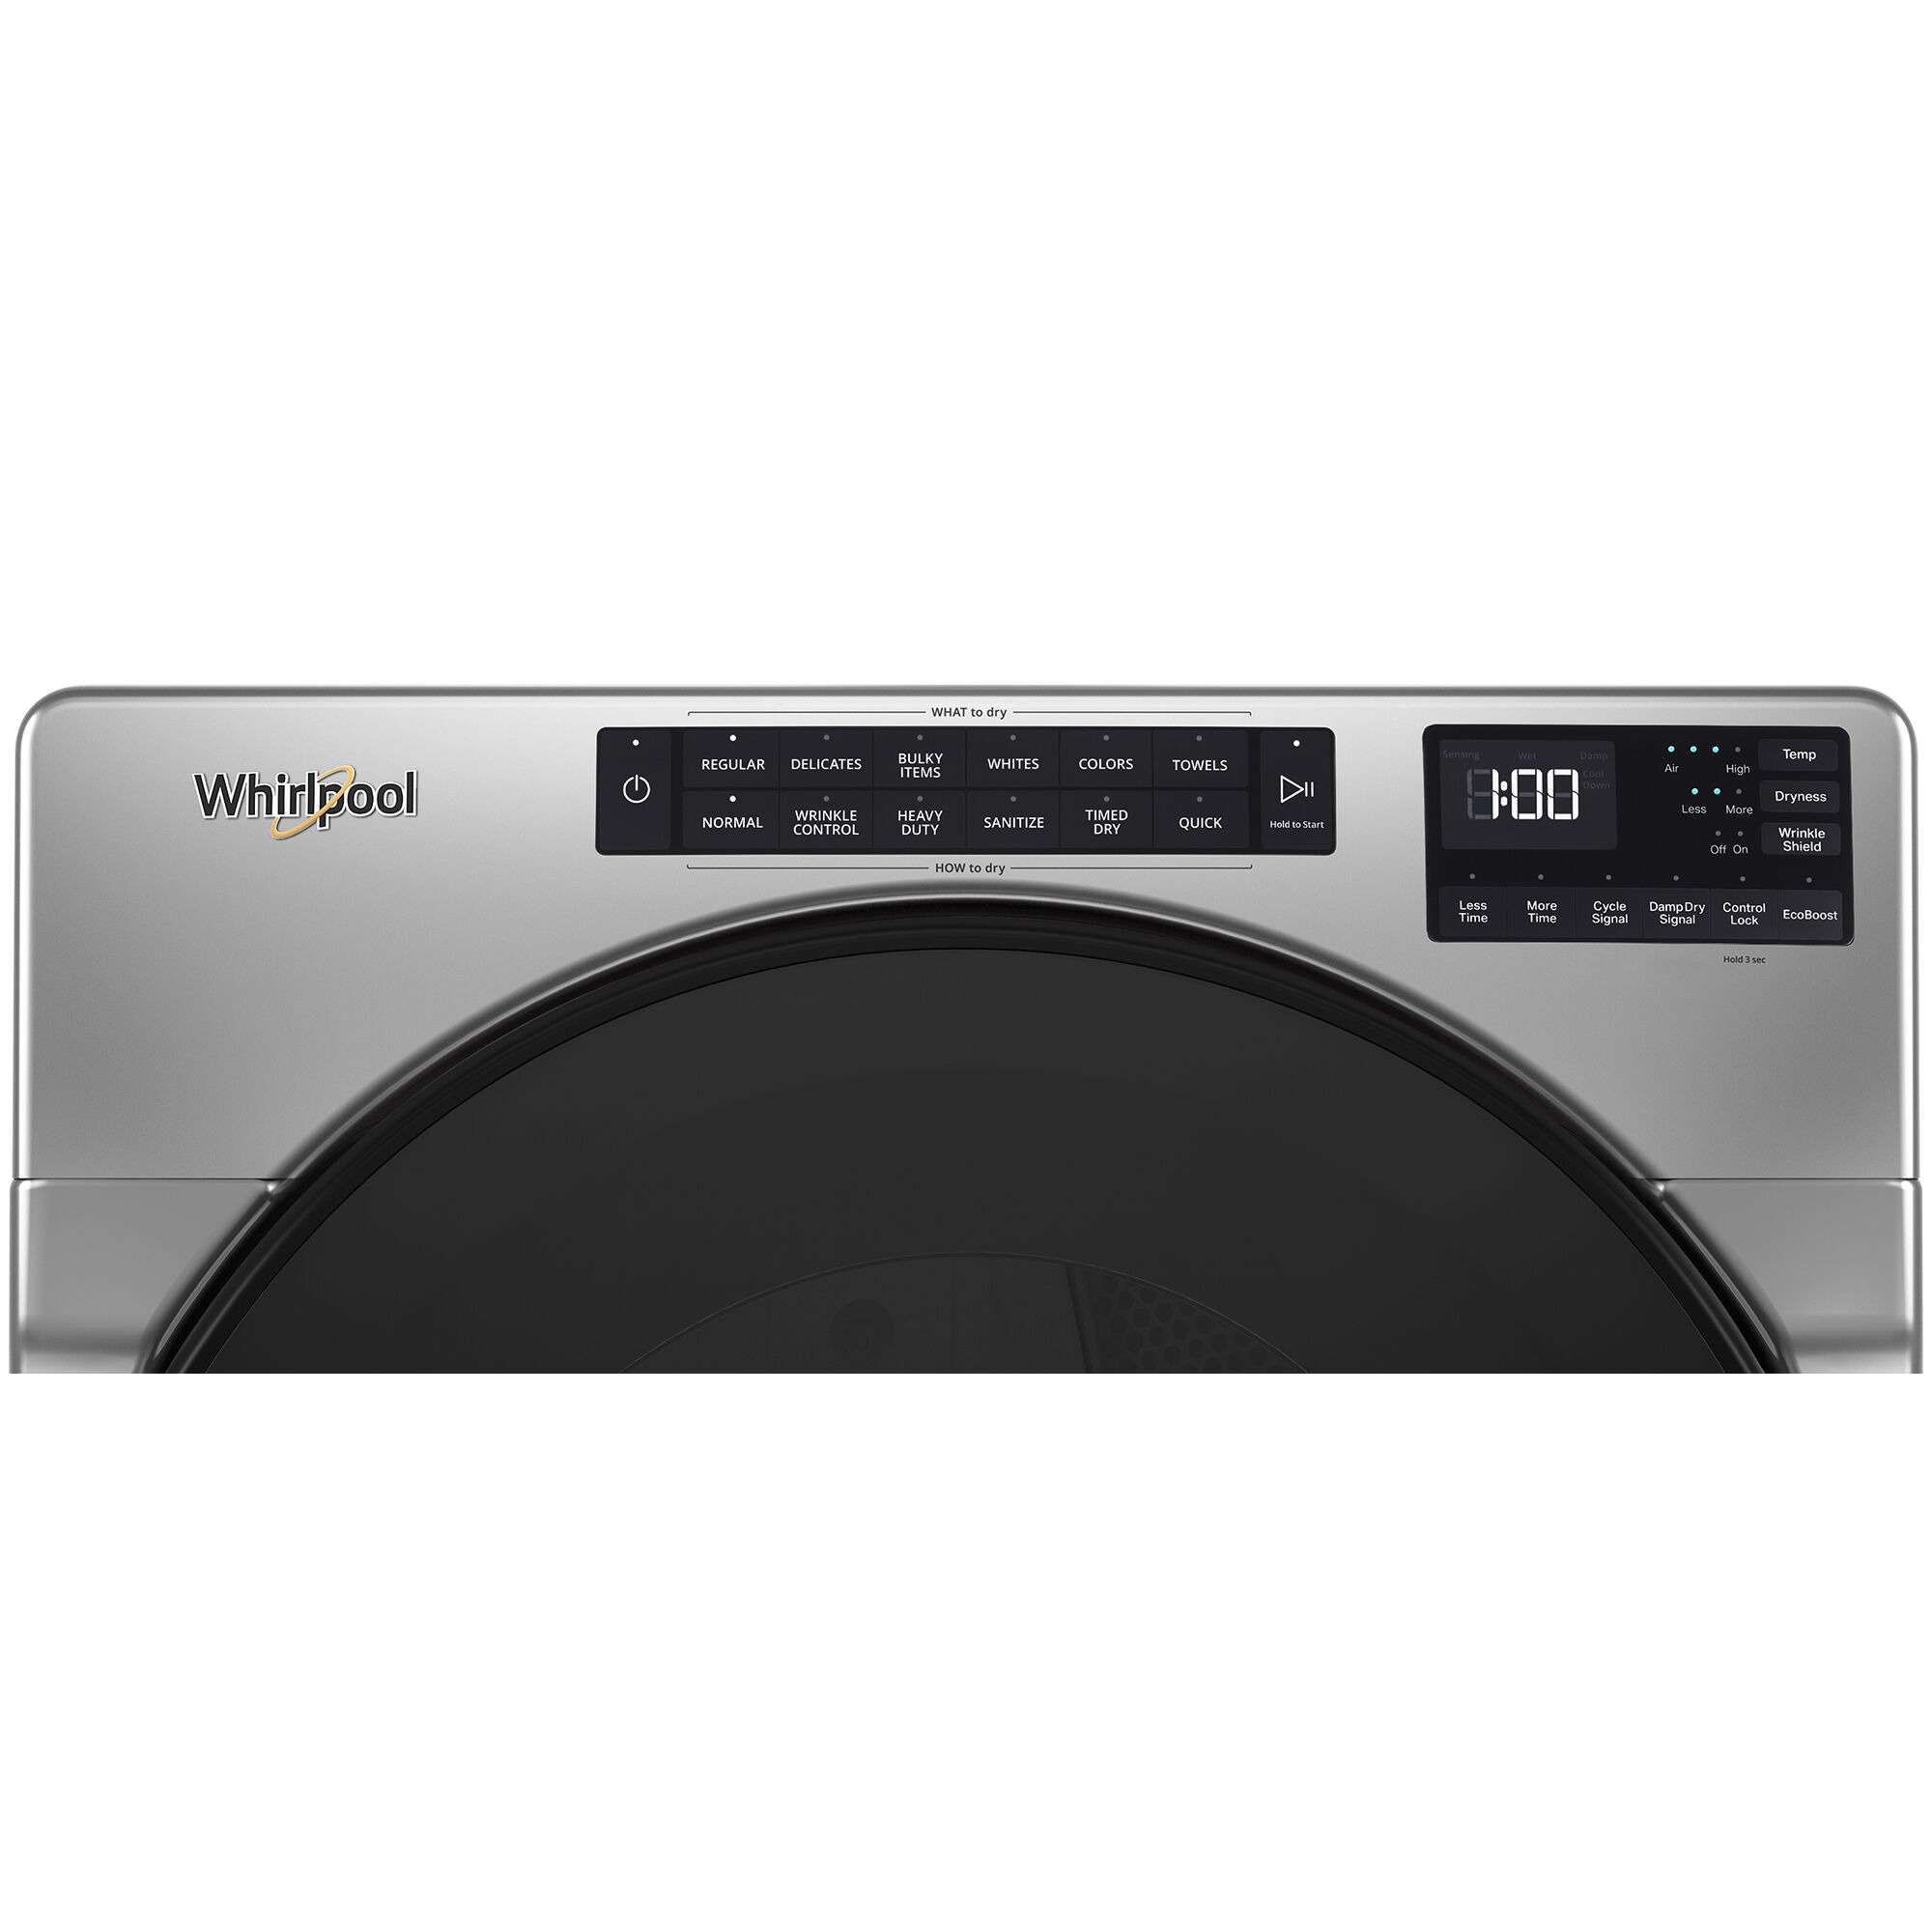 Whirlpool 27 in. 7.4 cu. ft. Front Loading Gas Dryer with 36 Dryer  Programs, 5 Dry Options, Sanitize Cycle, Wrinkle Care & Sensor Dry - Chrome  Shadow